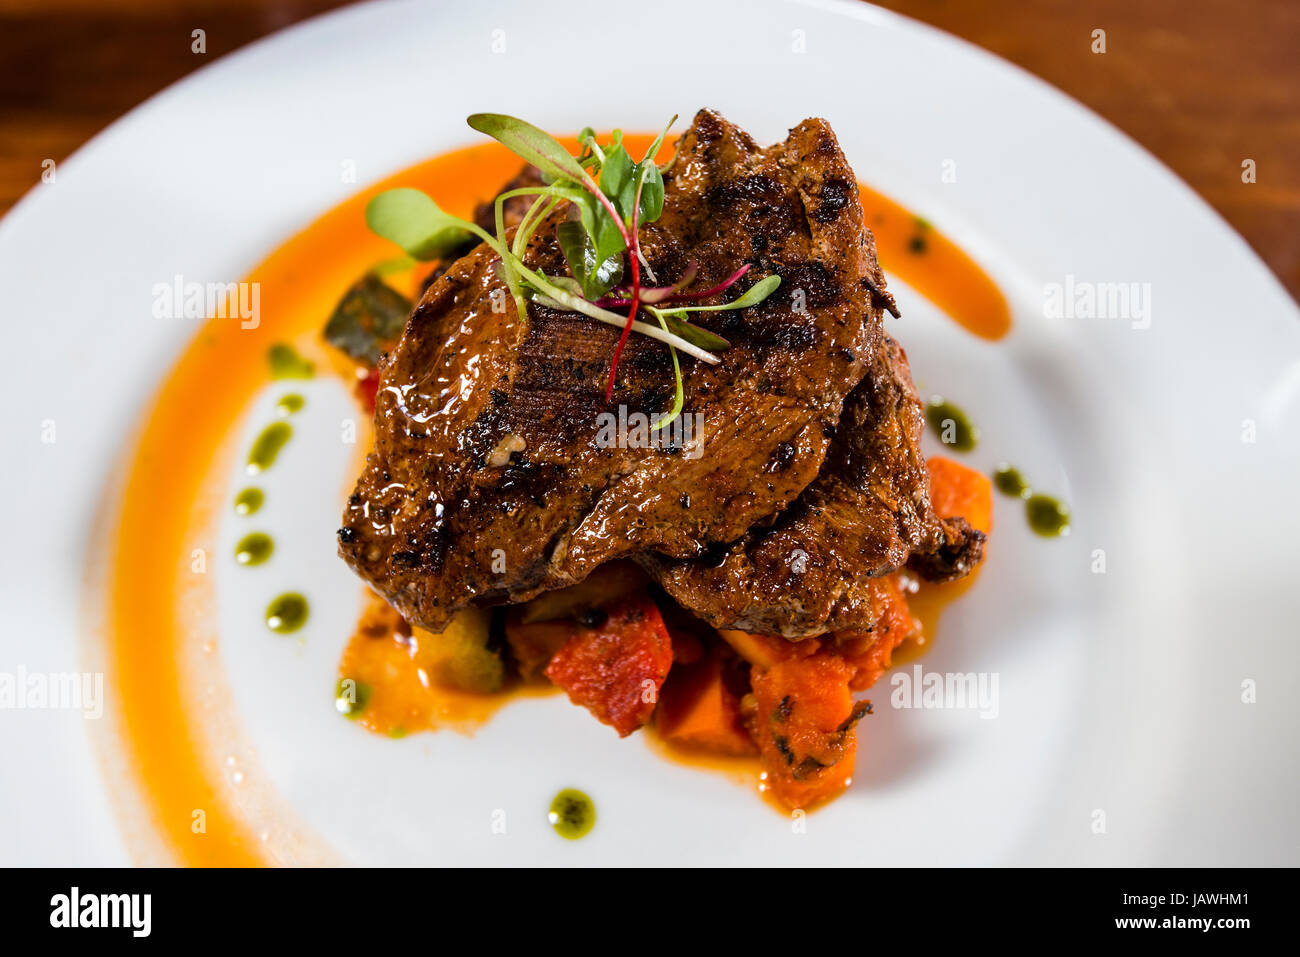 A gourmet chef prepared meal of roasted alpaca and peppers. Stock Photo